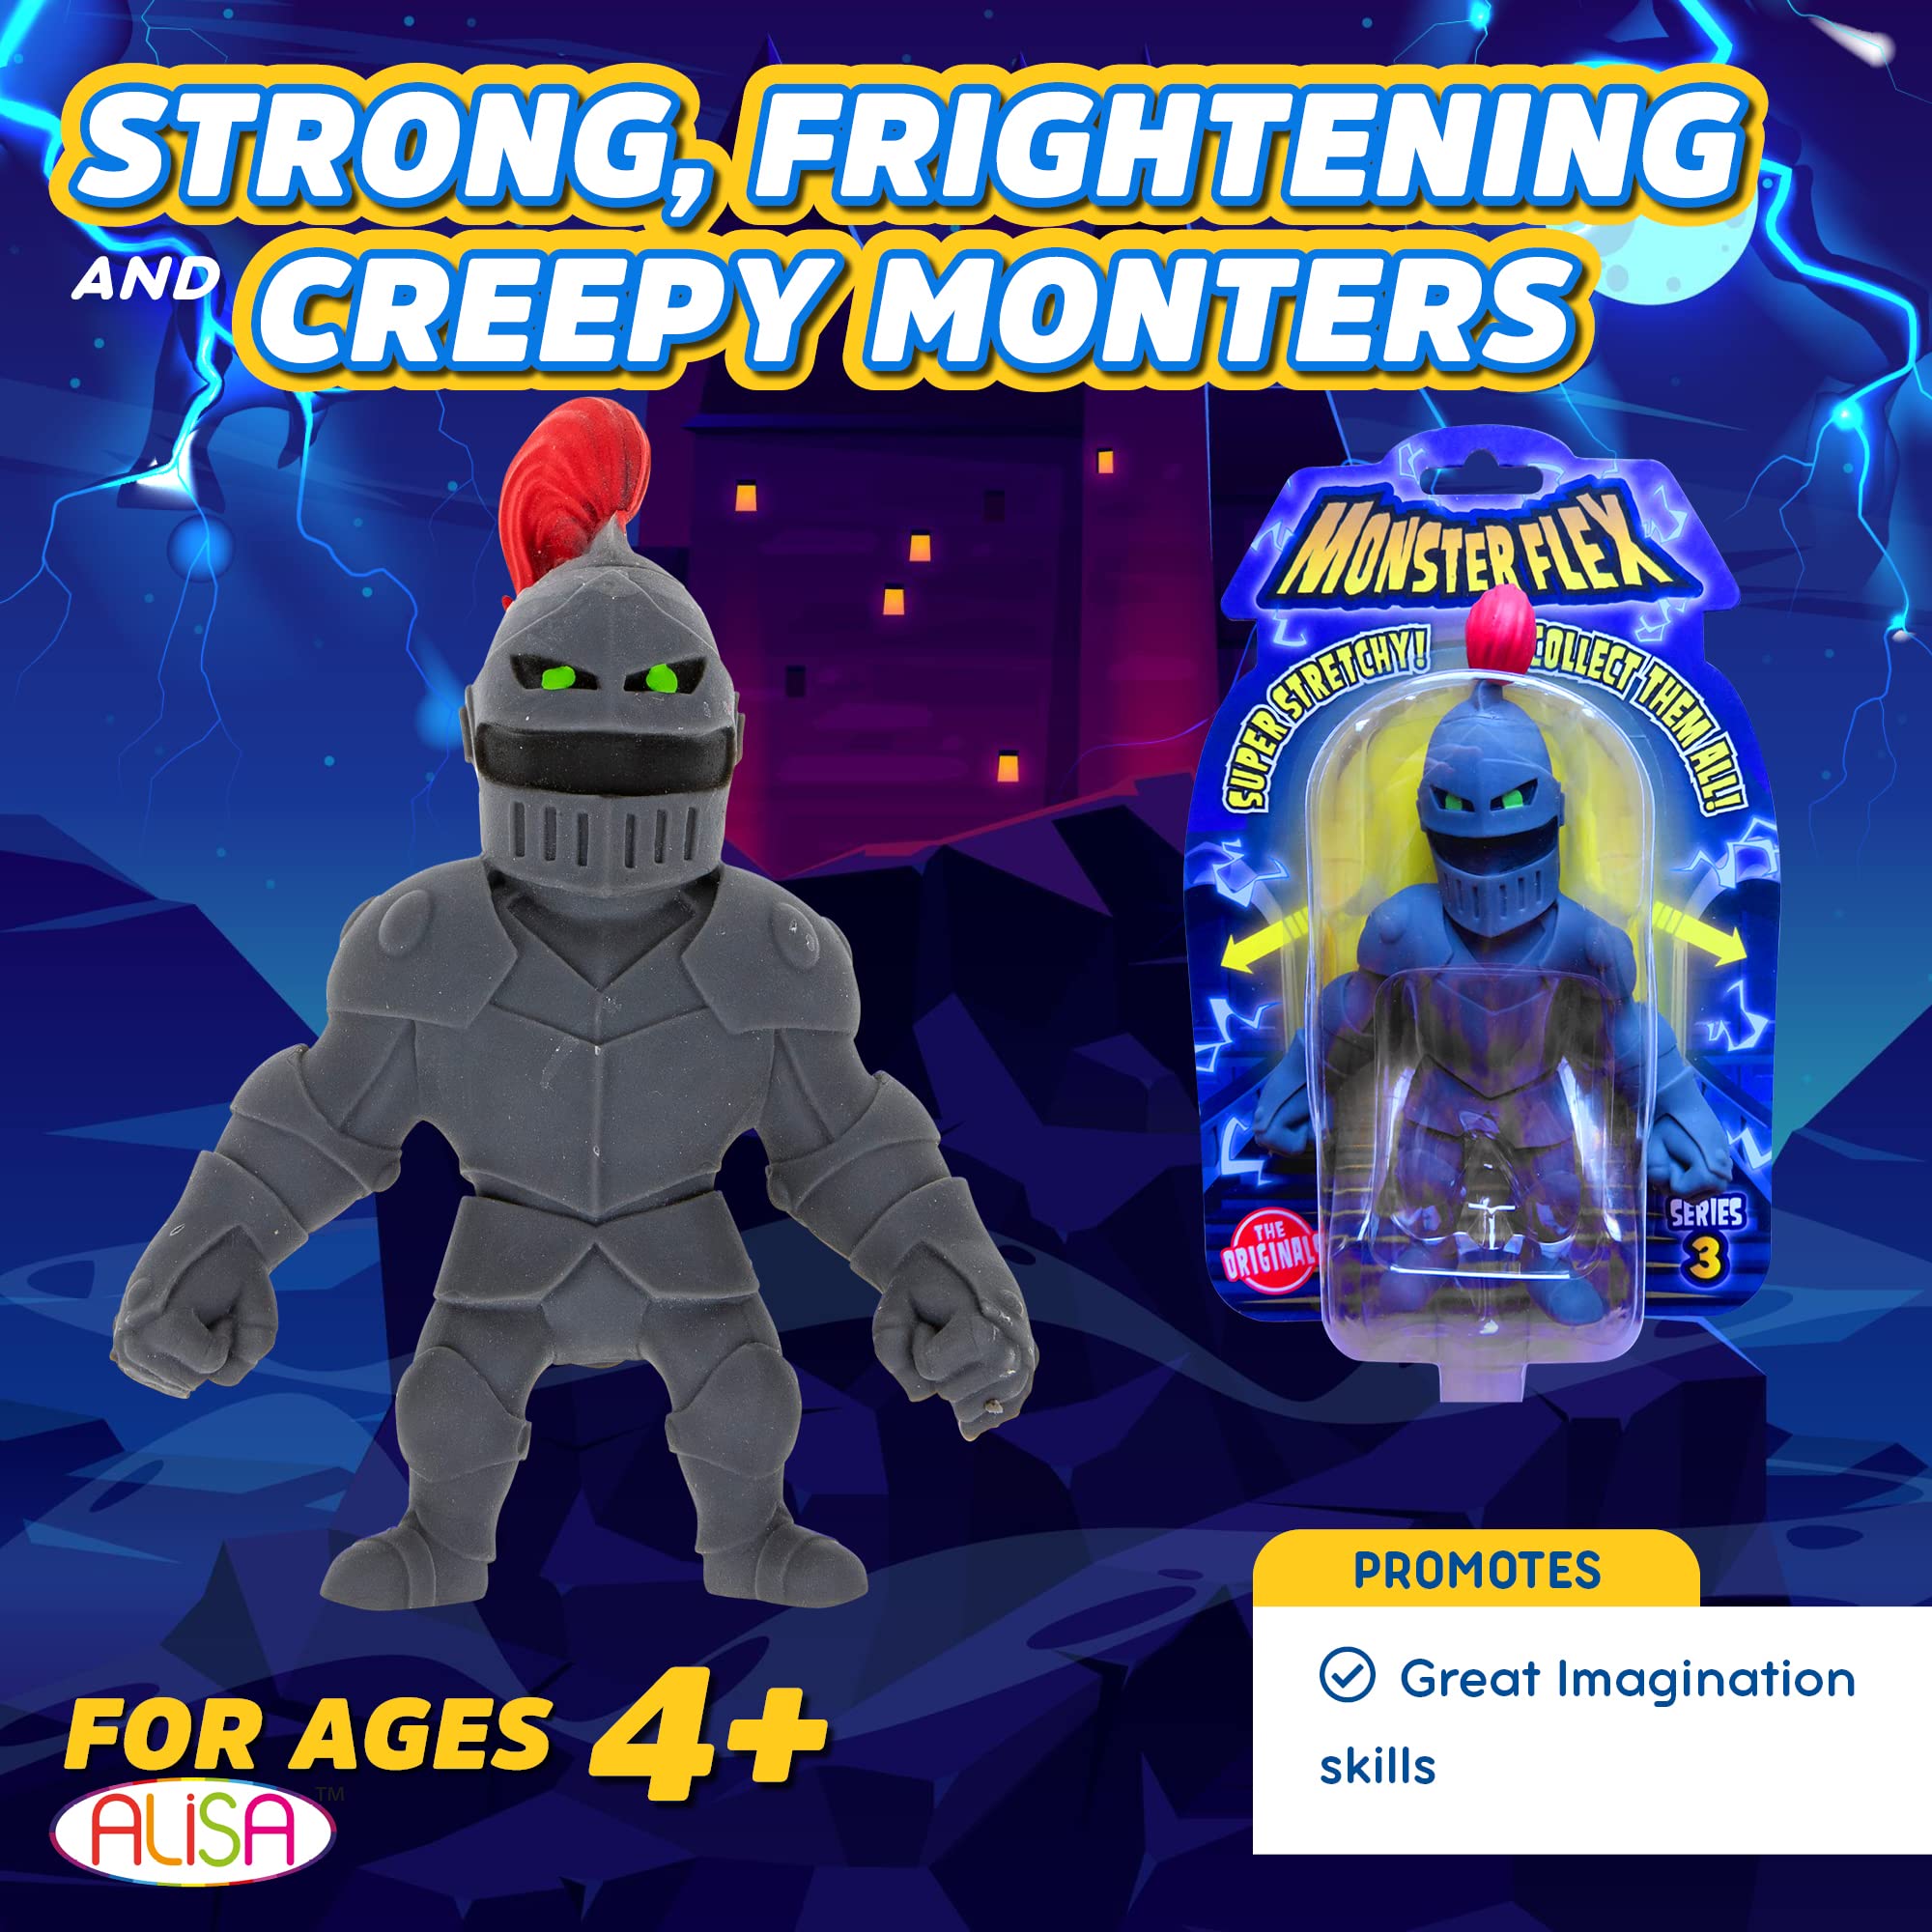 ALISA Monster Flex Stretchy Toys for Boys and Girls - 14 Unique Spooky Stretch Monsters - Monster Stretch Guy Toys for Kids Birthday Gift Party Favors, Sensory Fidget Stress Toys for Kids - Series 3